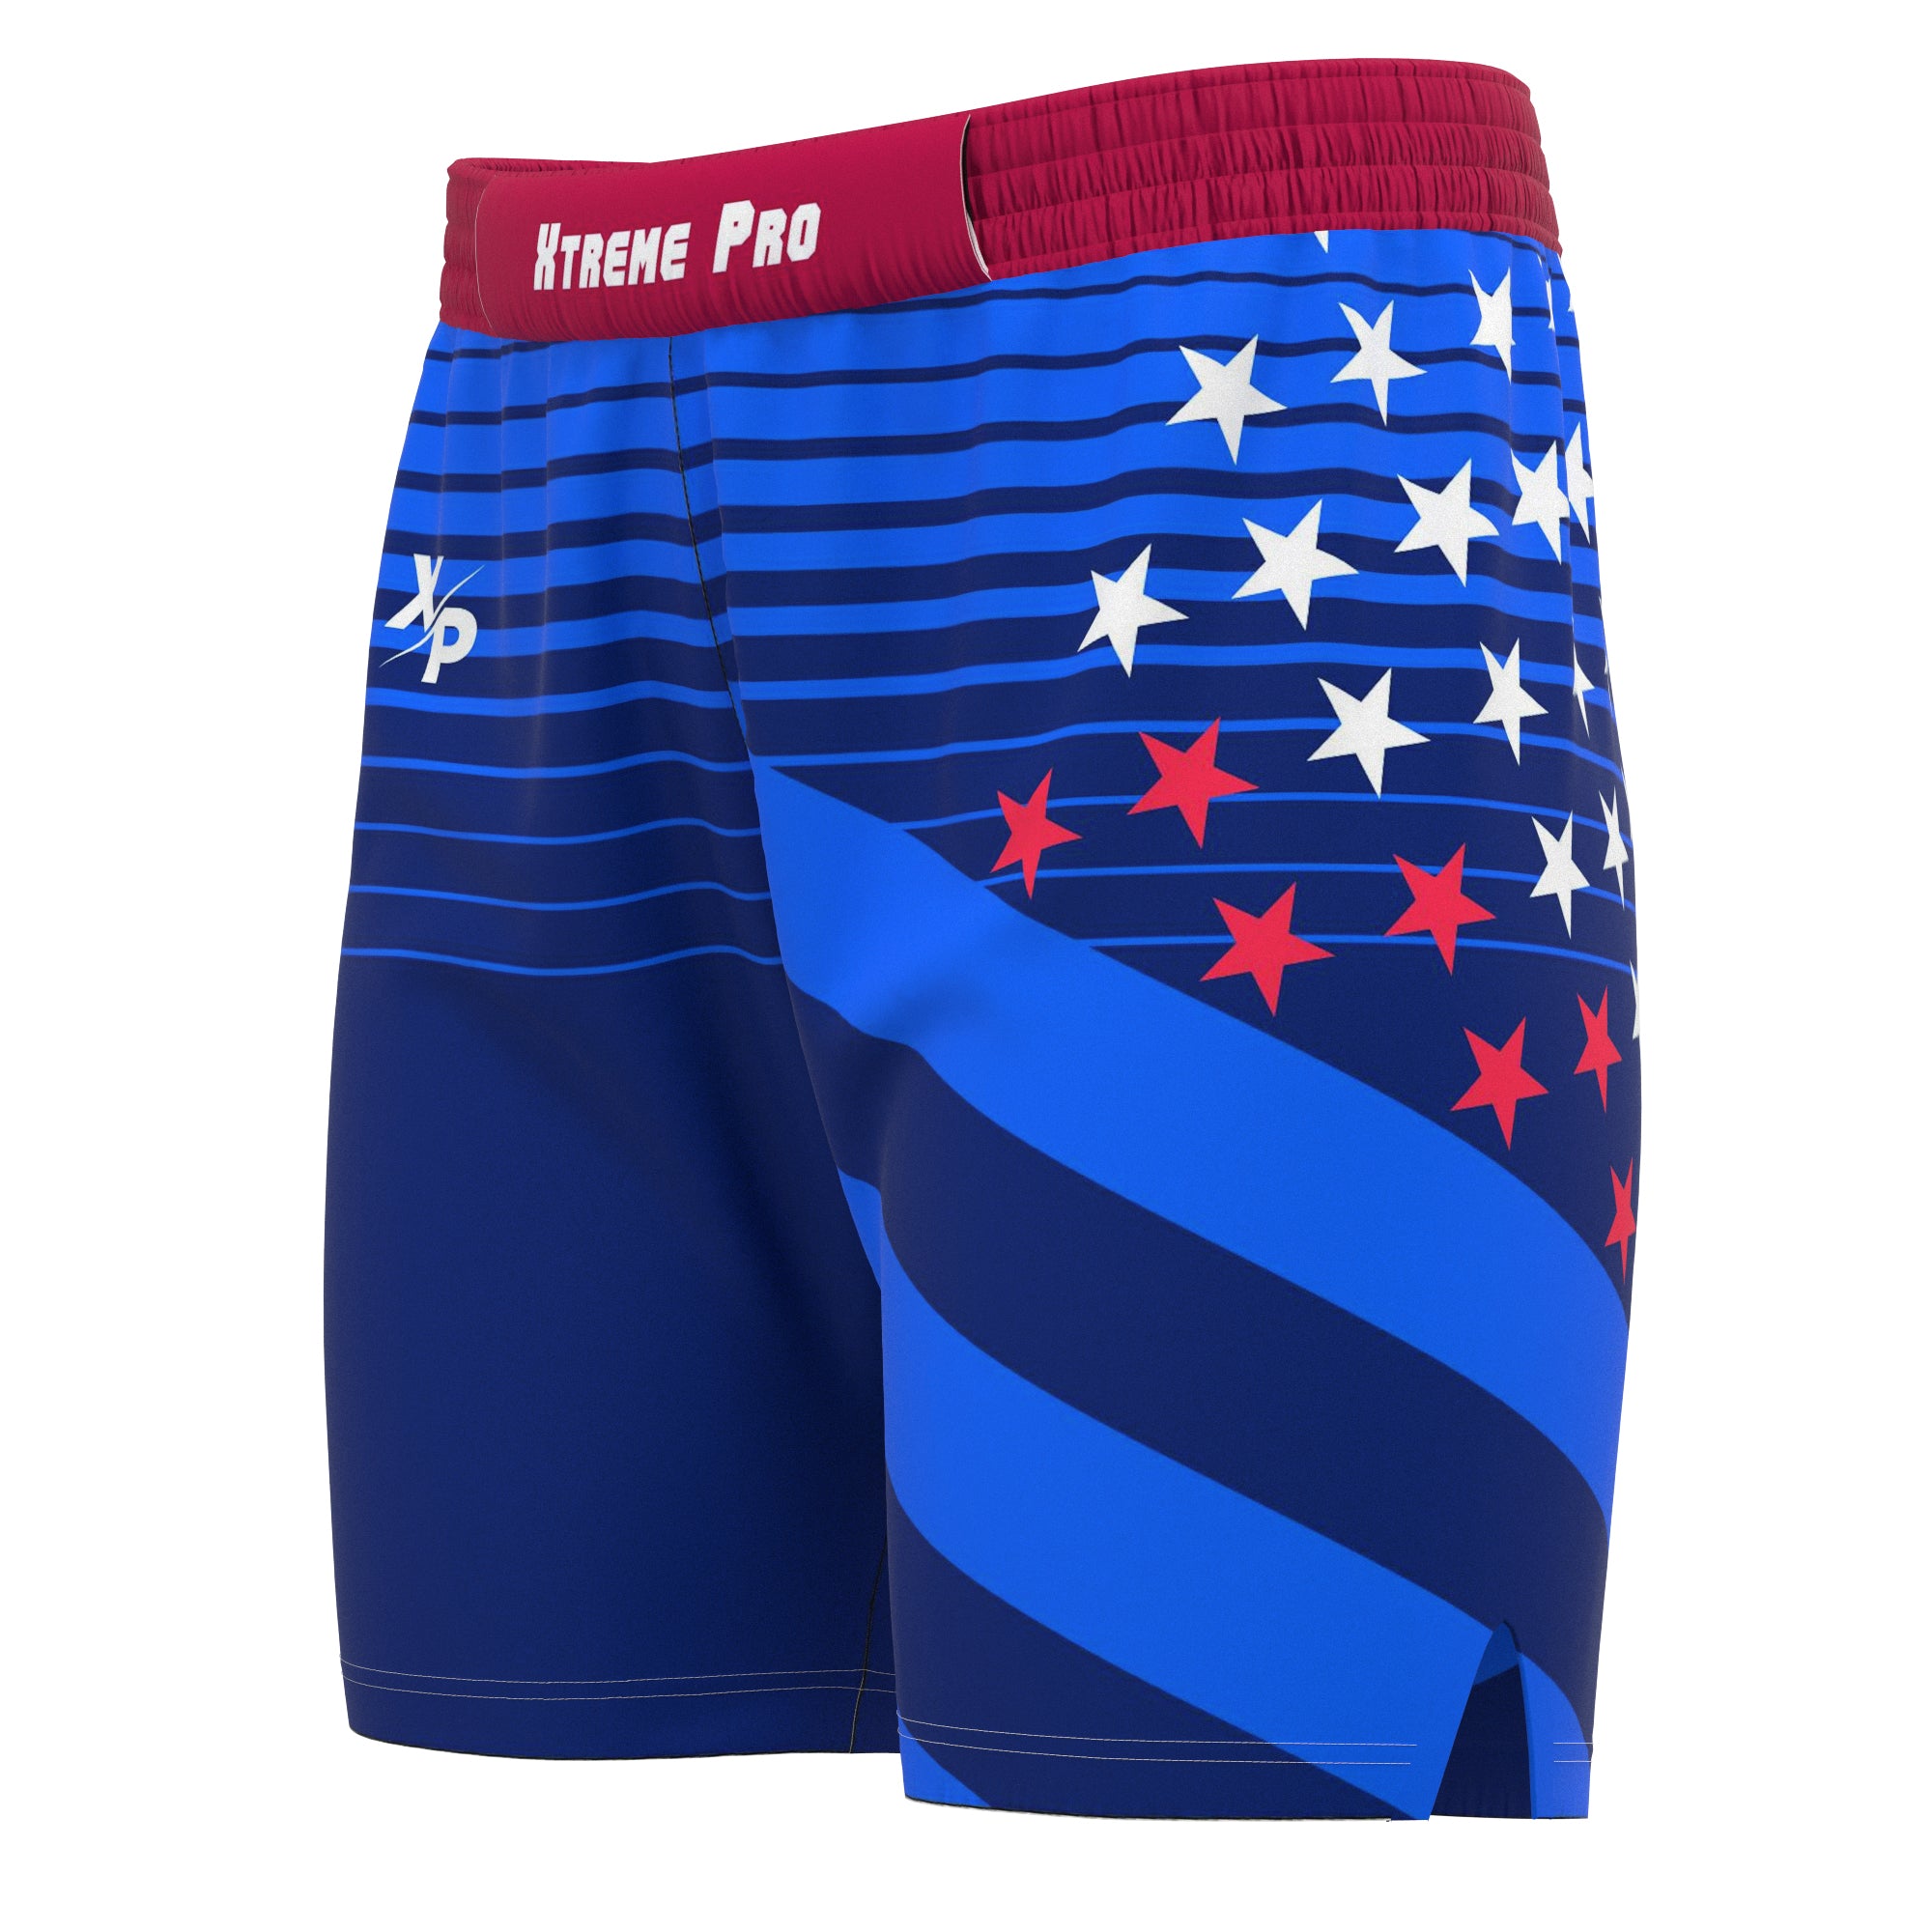 Olympic Championship Signature Sport Shorts in Blue